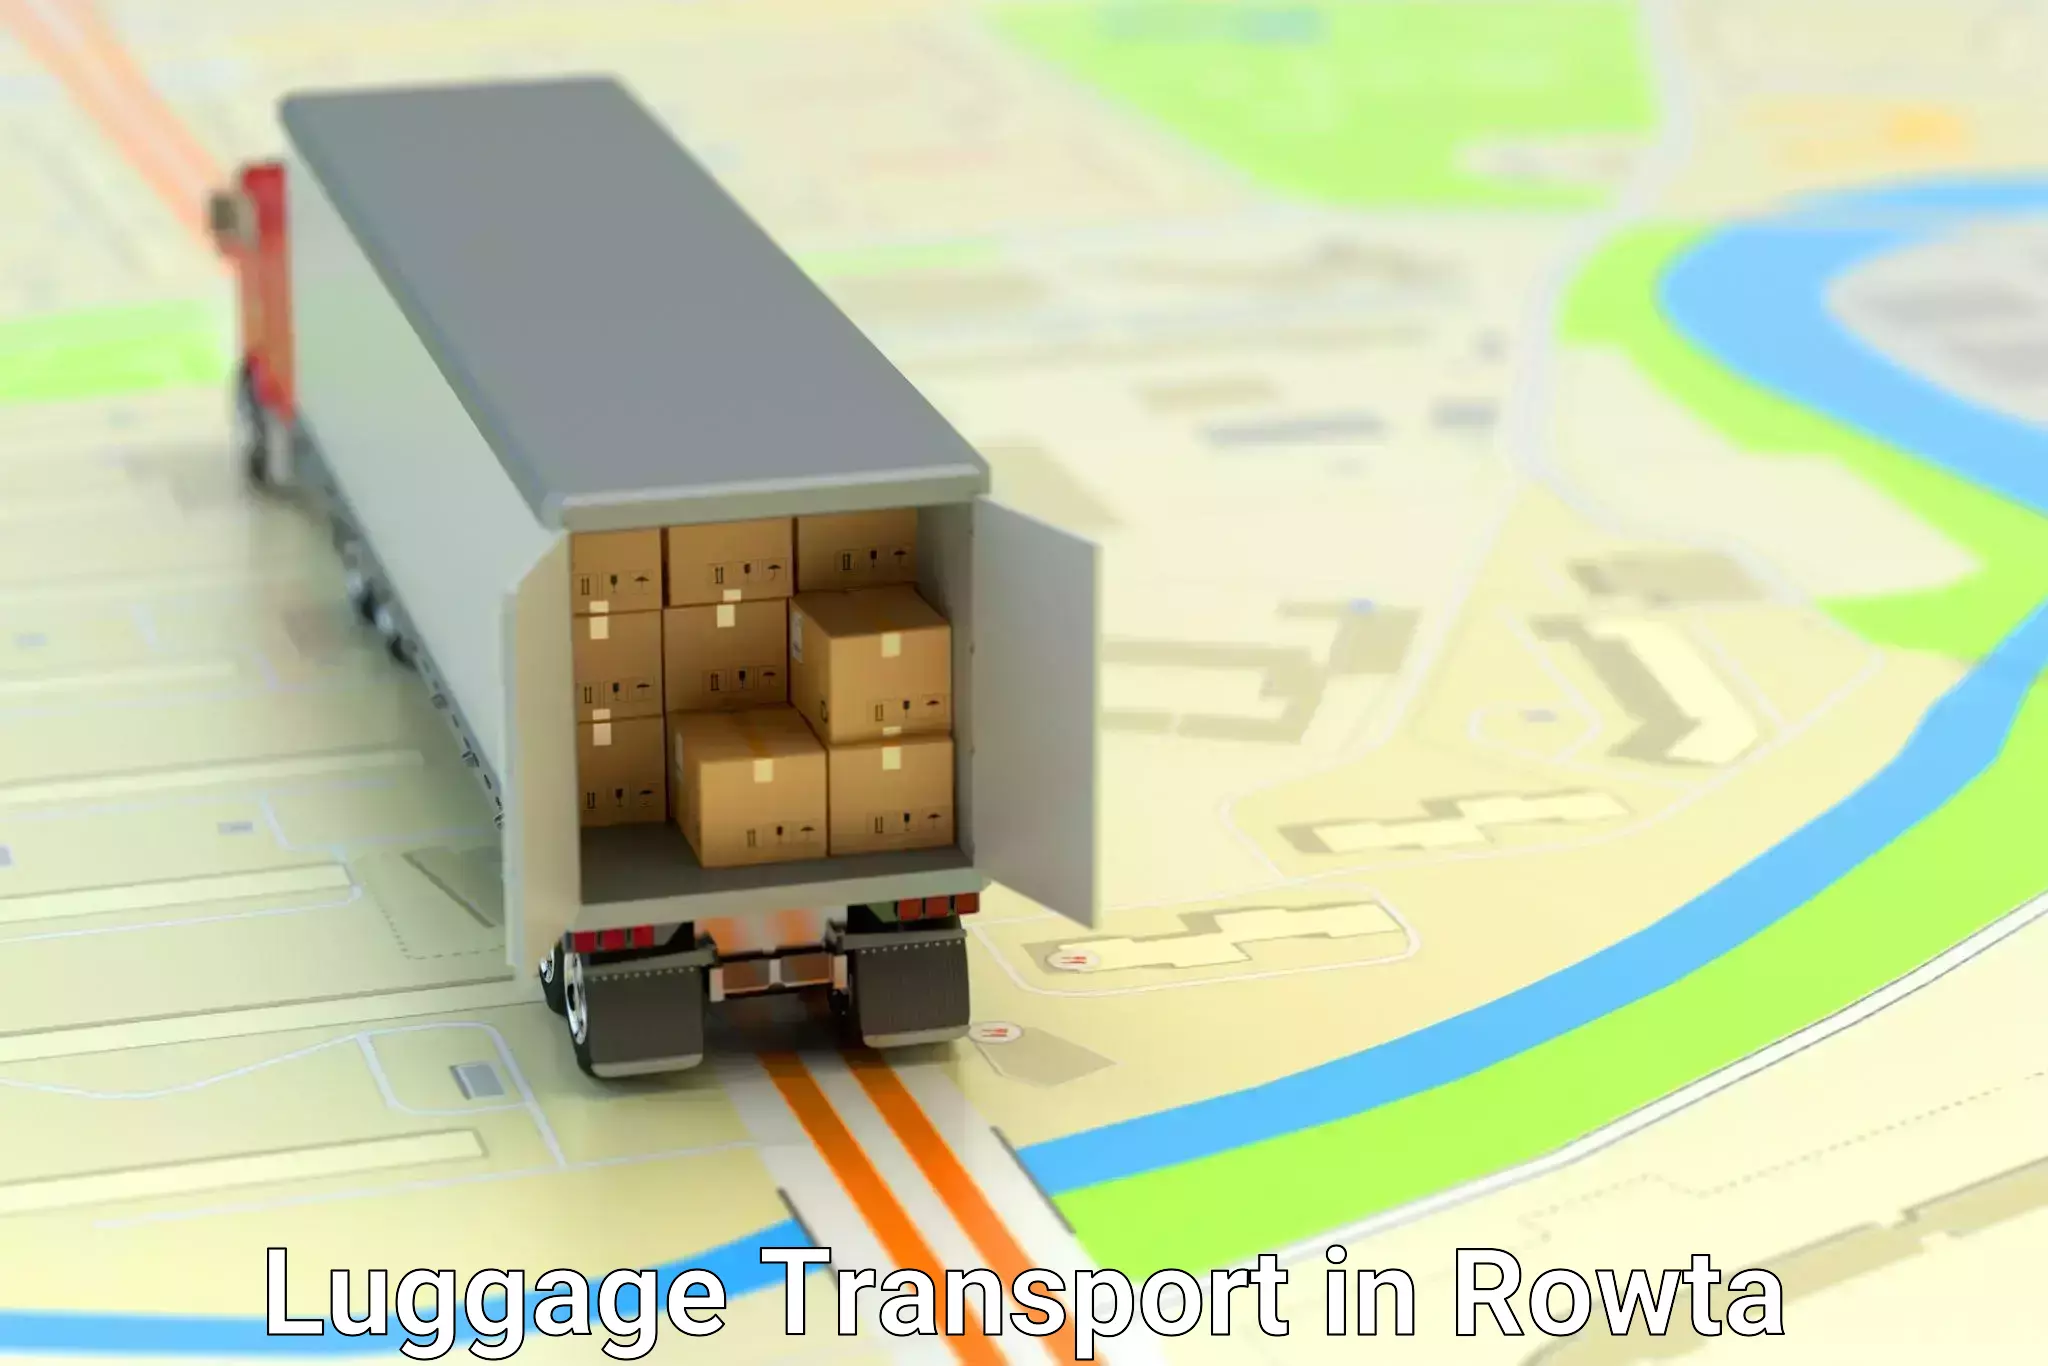 Baggage transport professionals in Rowta